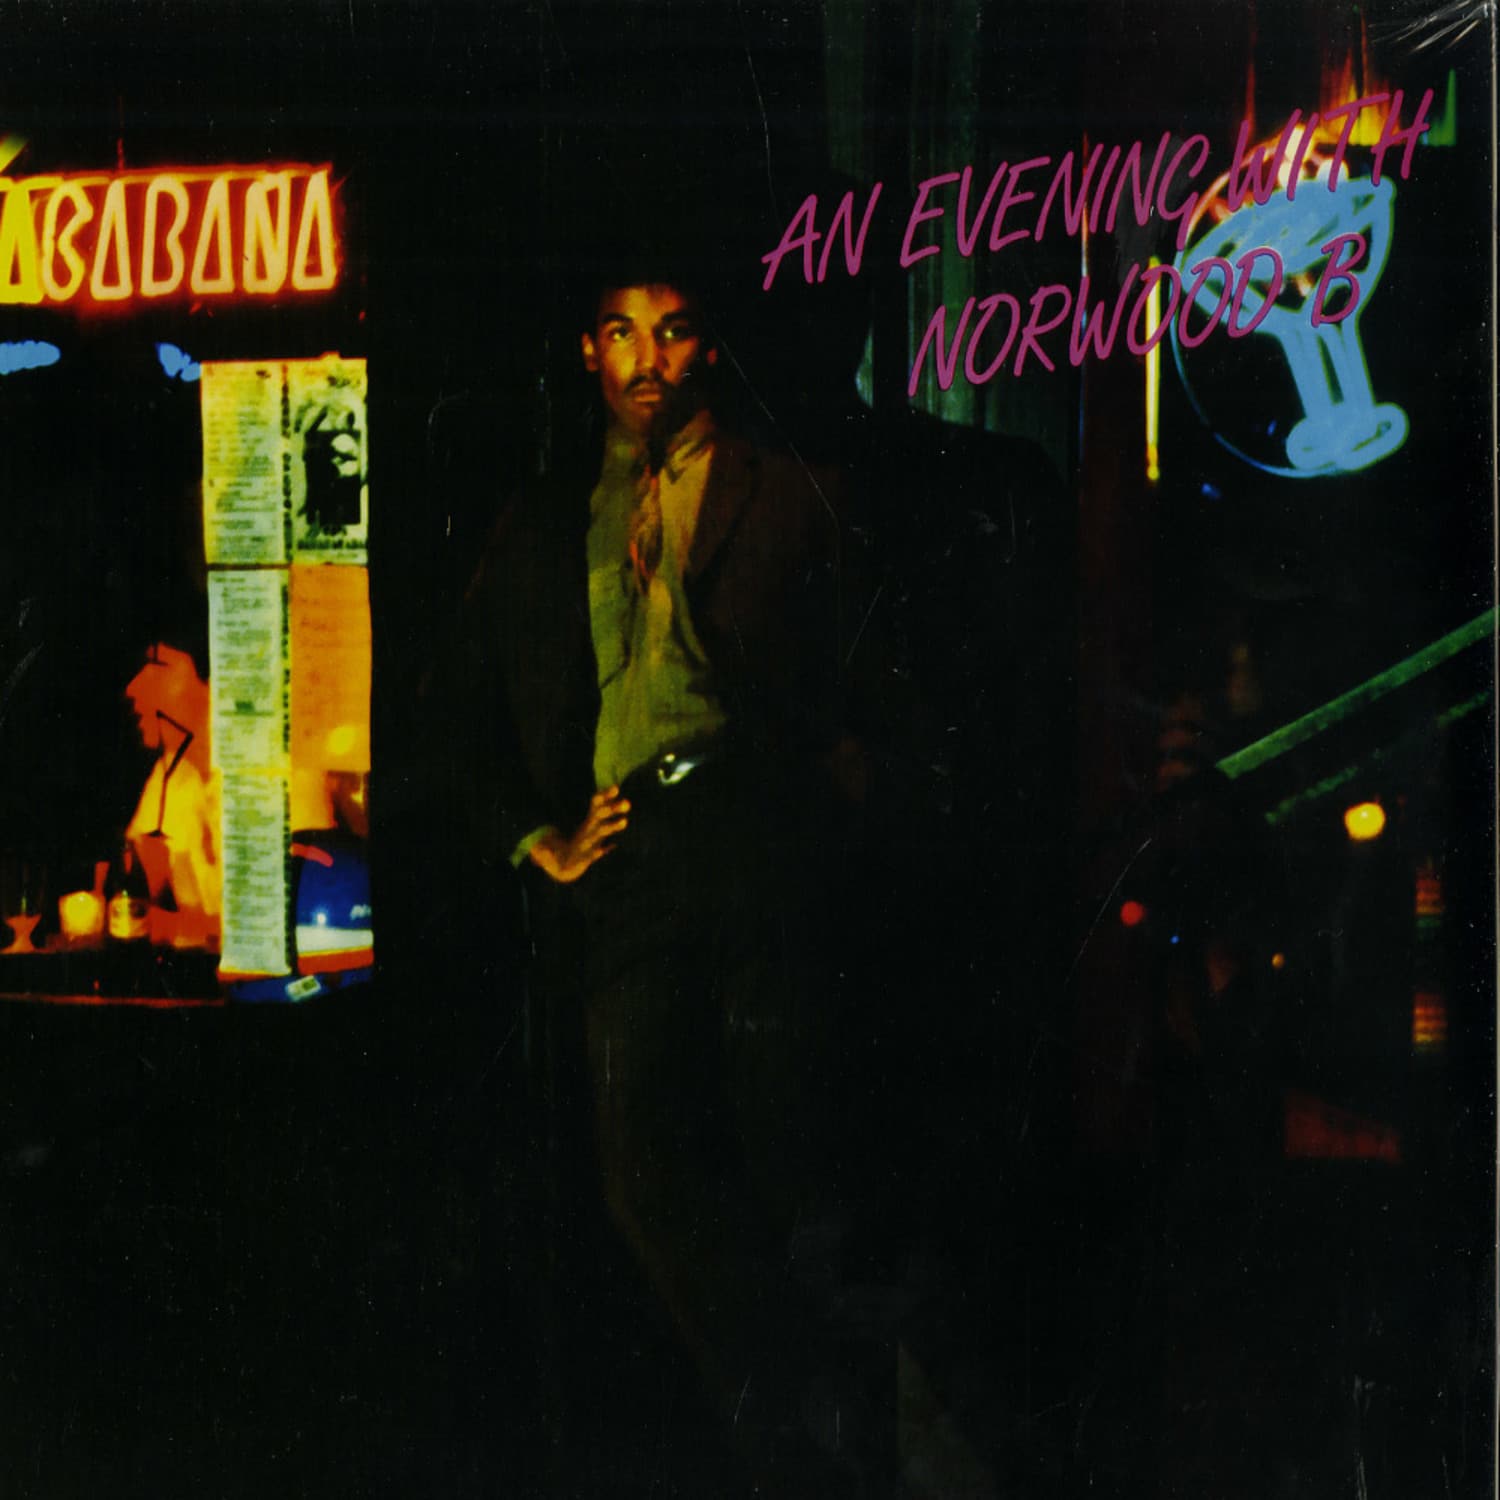 Norwood B. - AN EVEING WITH NORWOOD B 